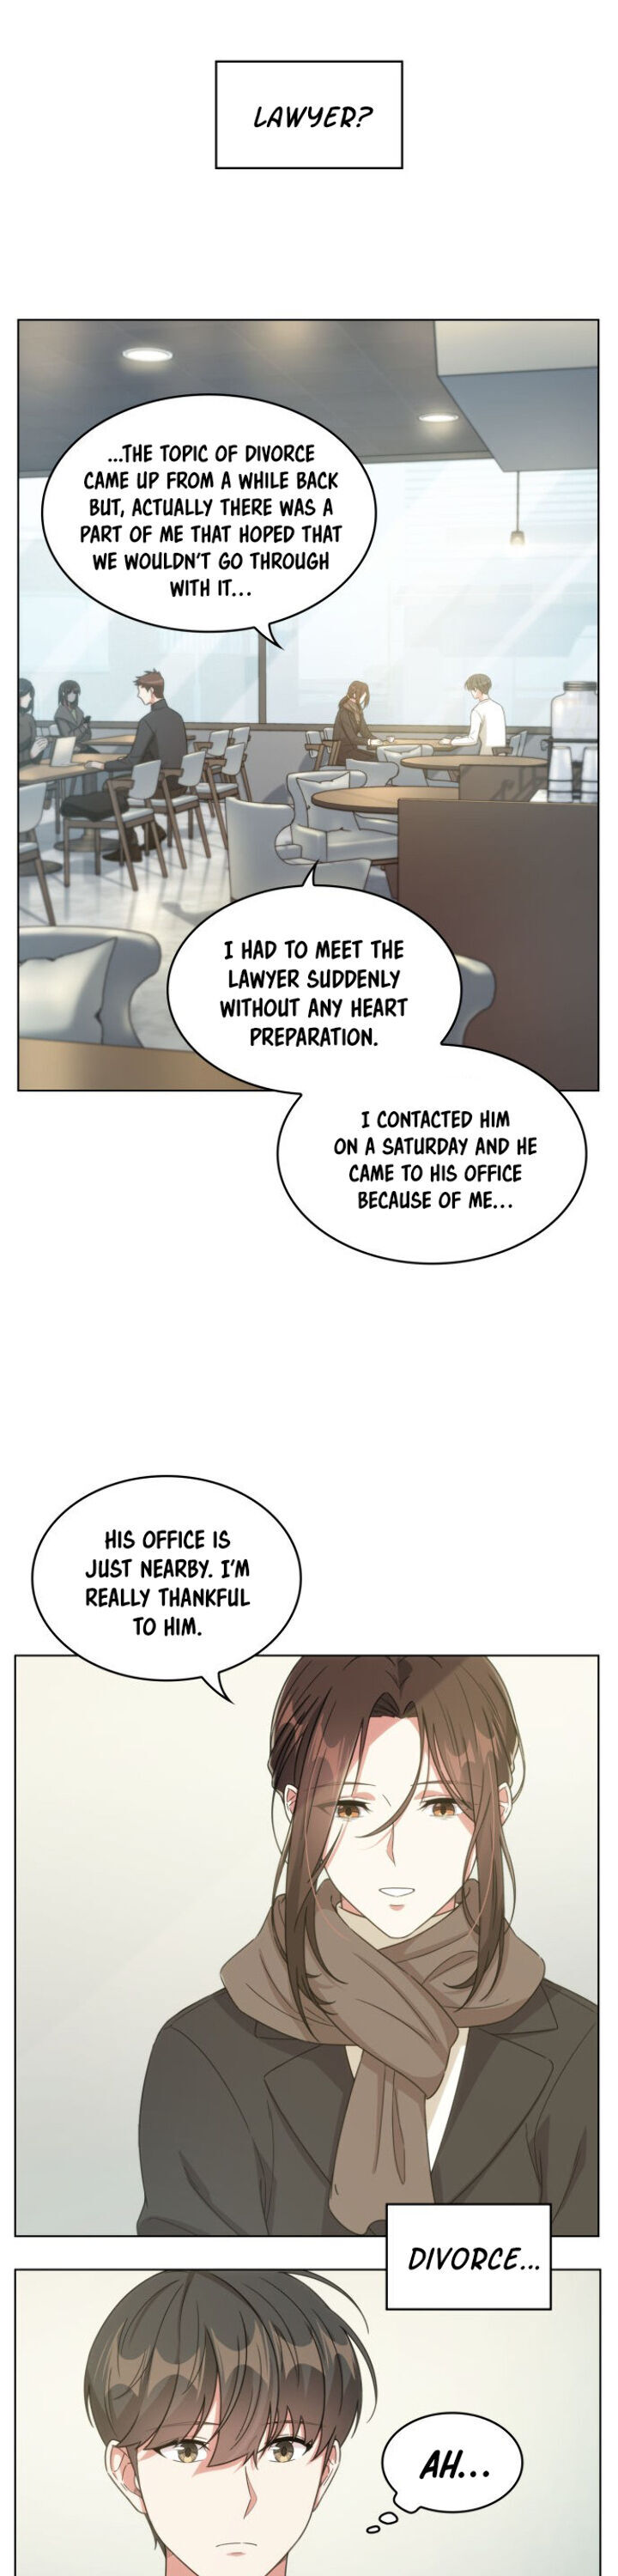 My Office Noona’s Story - Chapter 18 Page 12